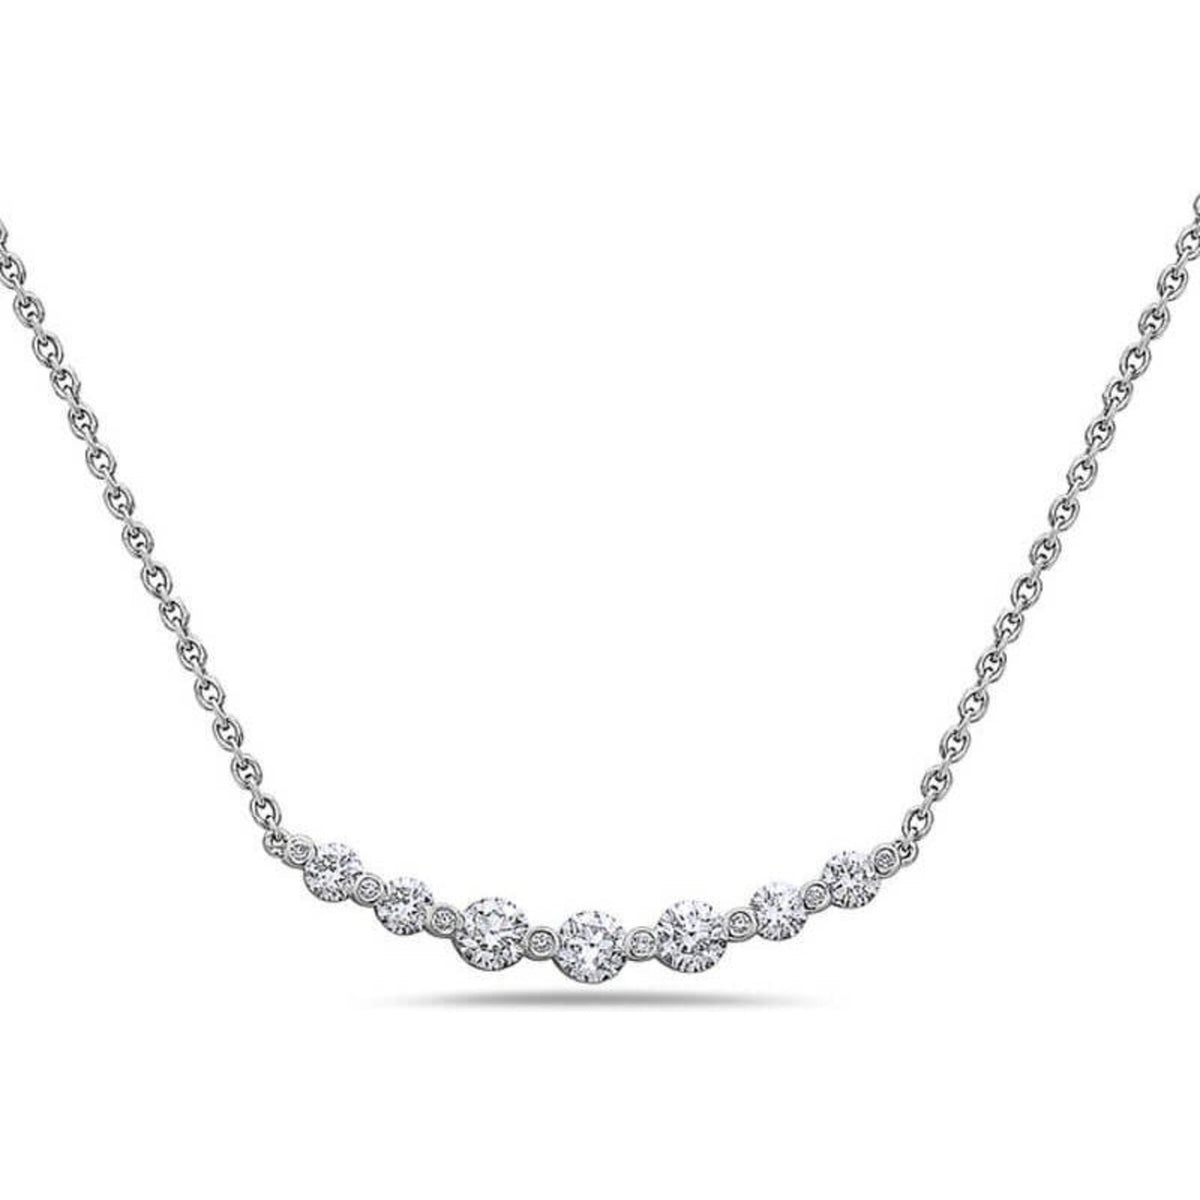 Charles Krypell Diamond Curved Bar Necklace 18kw